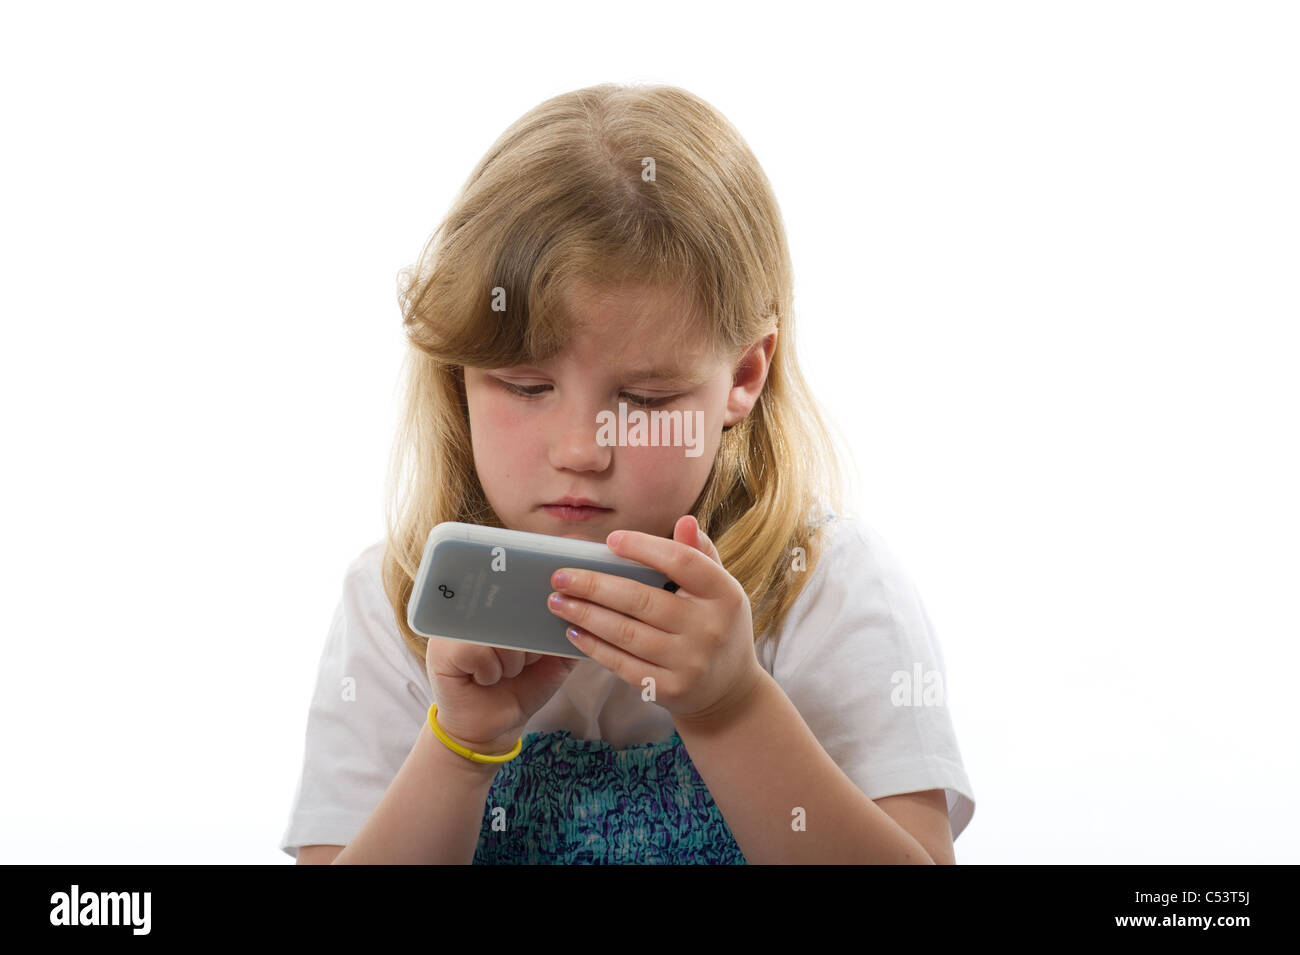 Girl of primary age playing with an iphone/ipod touch against a plain white studio background. Stock Photo